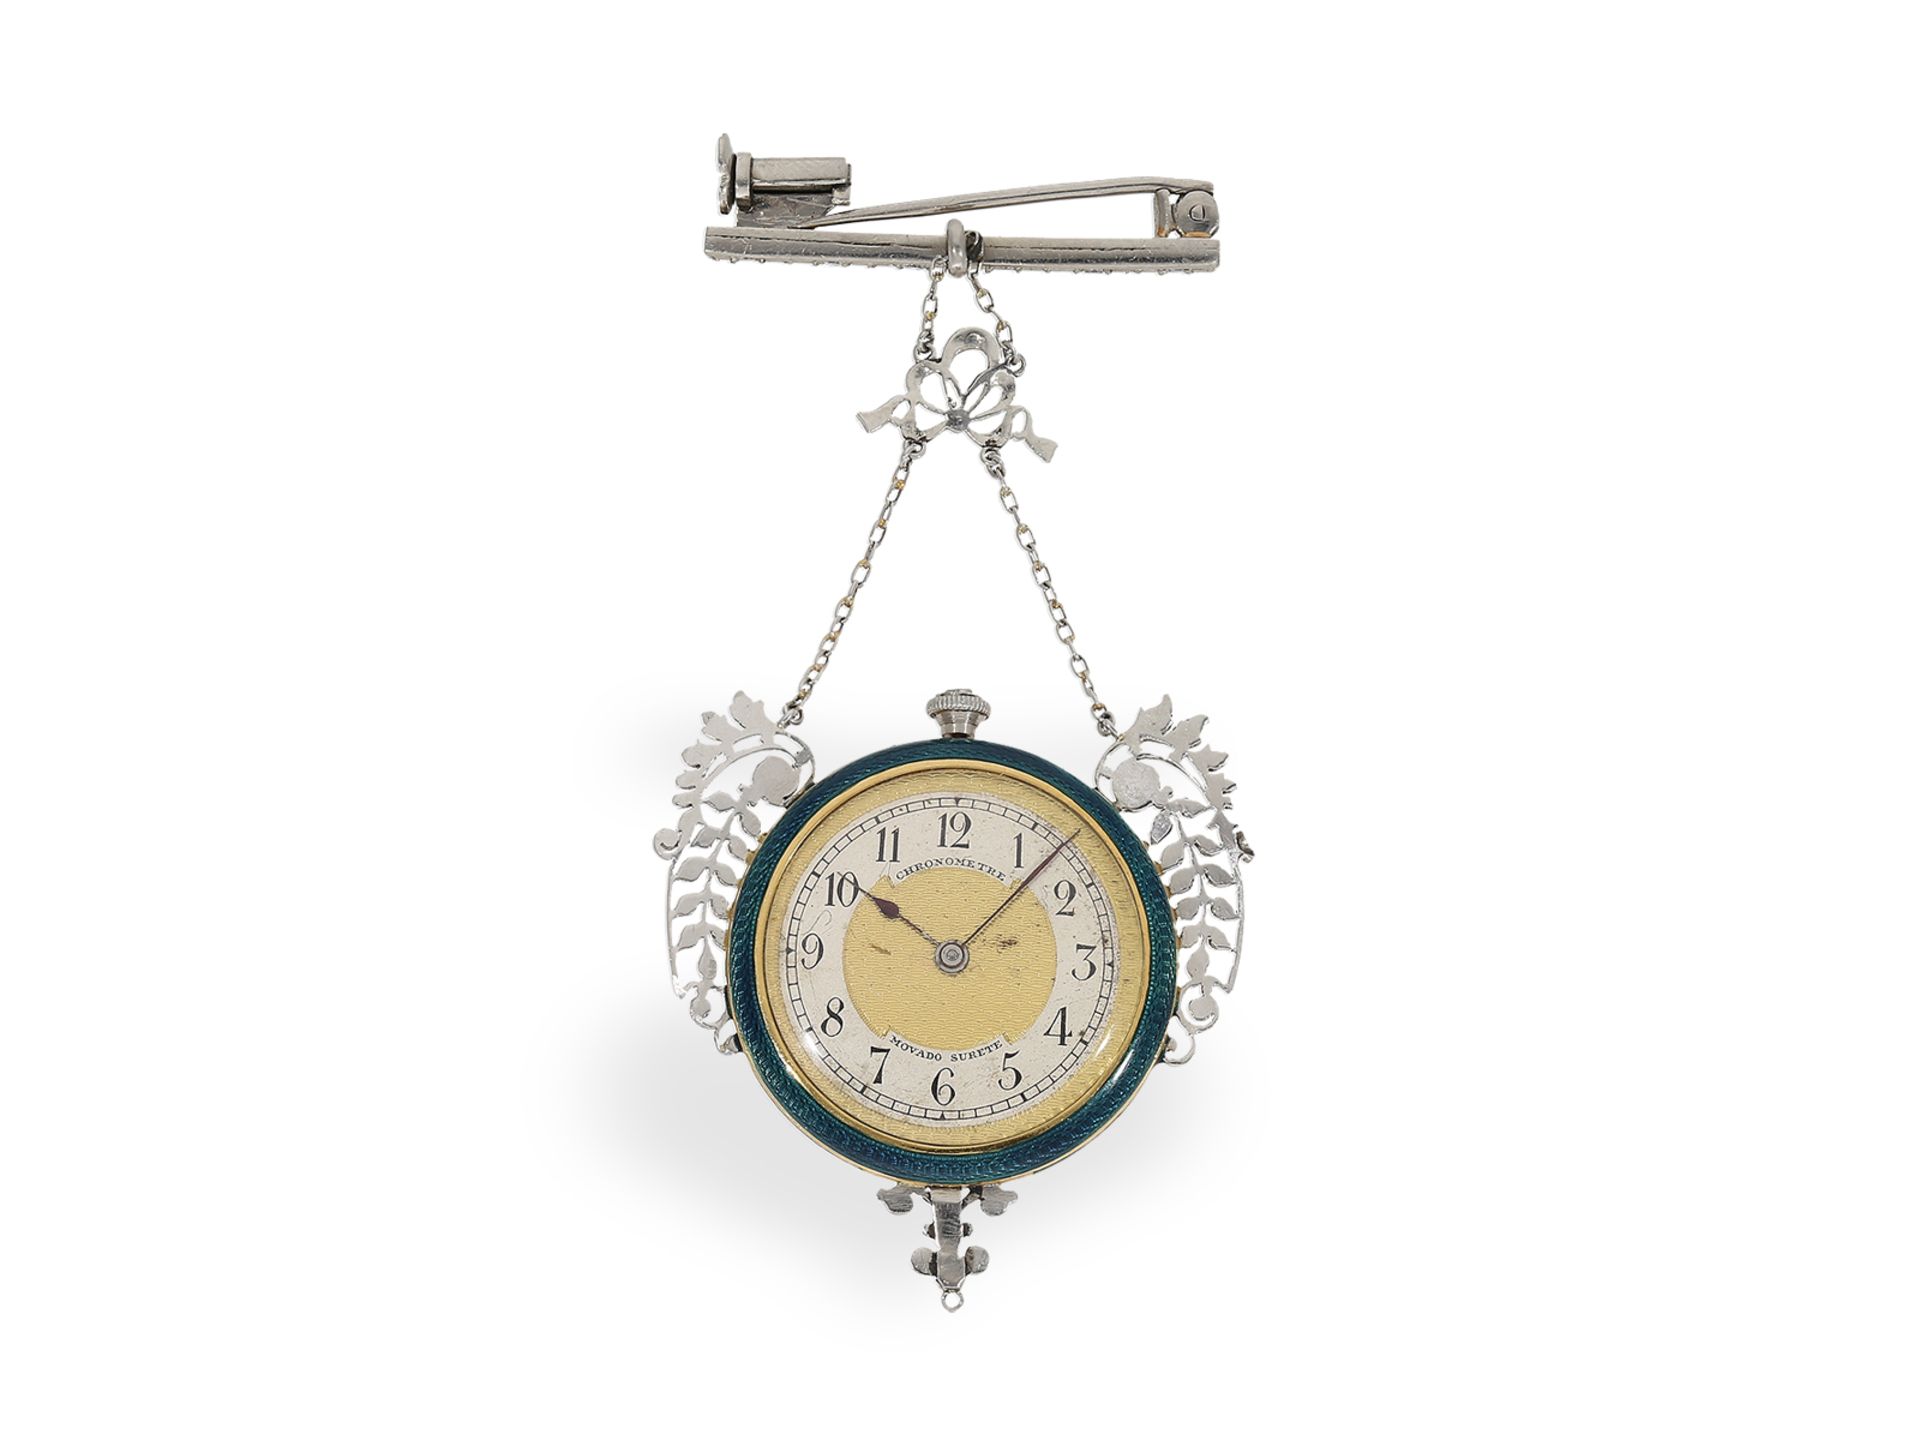 Highly refined Art Nouveau pendant watch/brooch watch, gold/platinum/enamel with diamond setting, Mo - Image 2 of 4